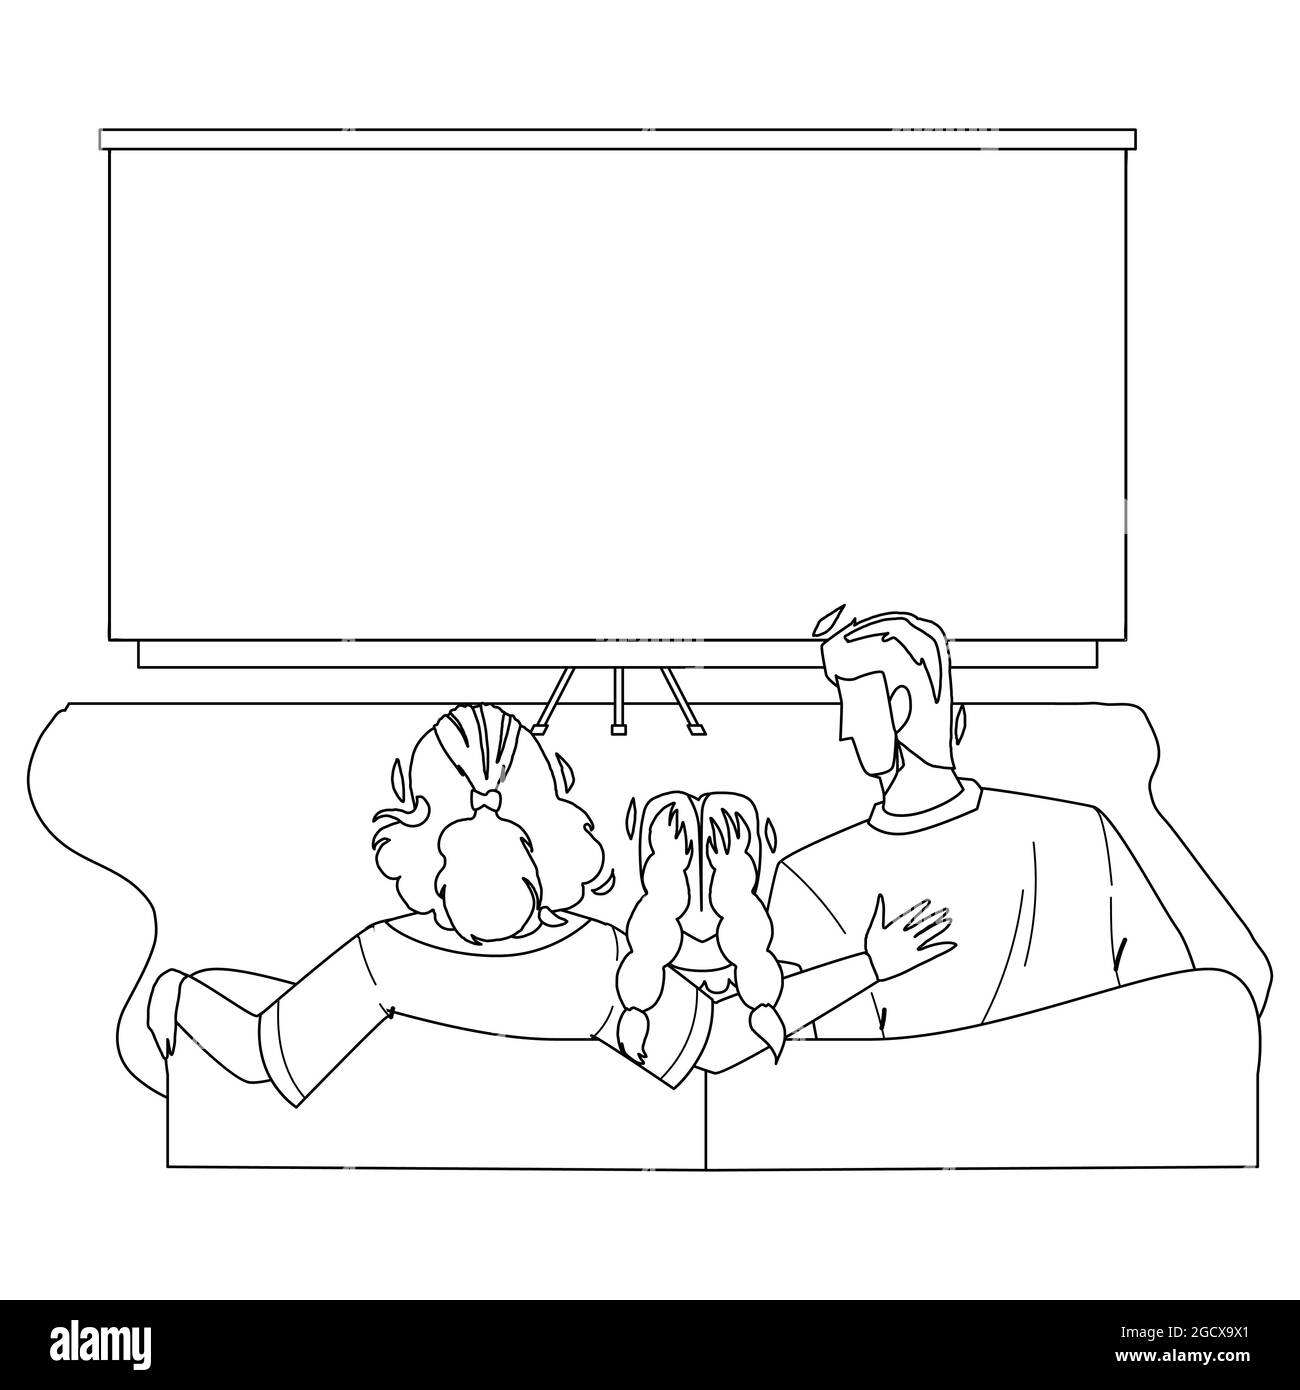 Home Theatre Watching Family Togetherness Vector Stock Vector